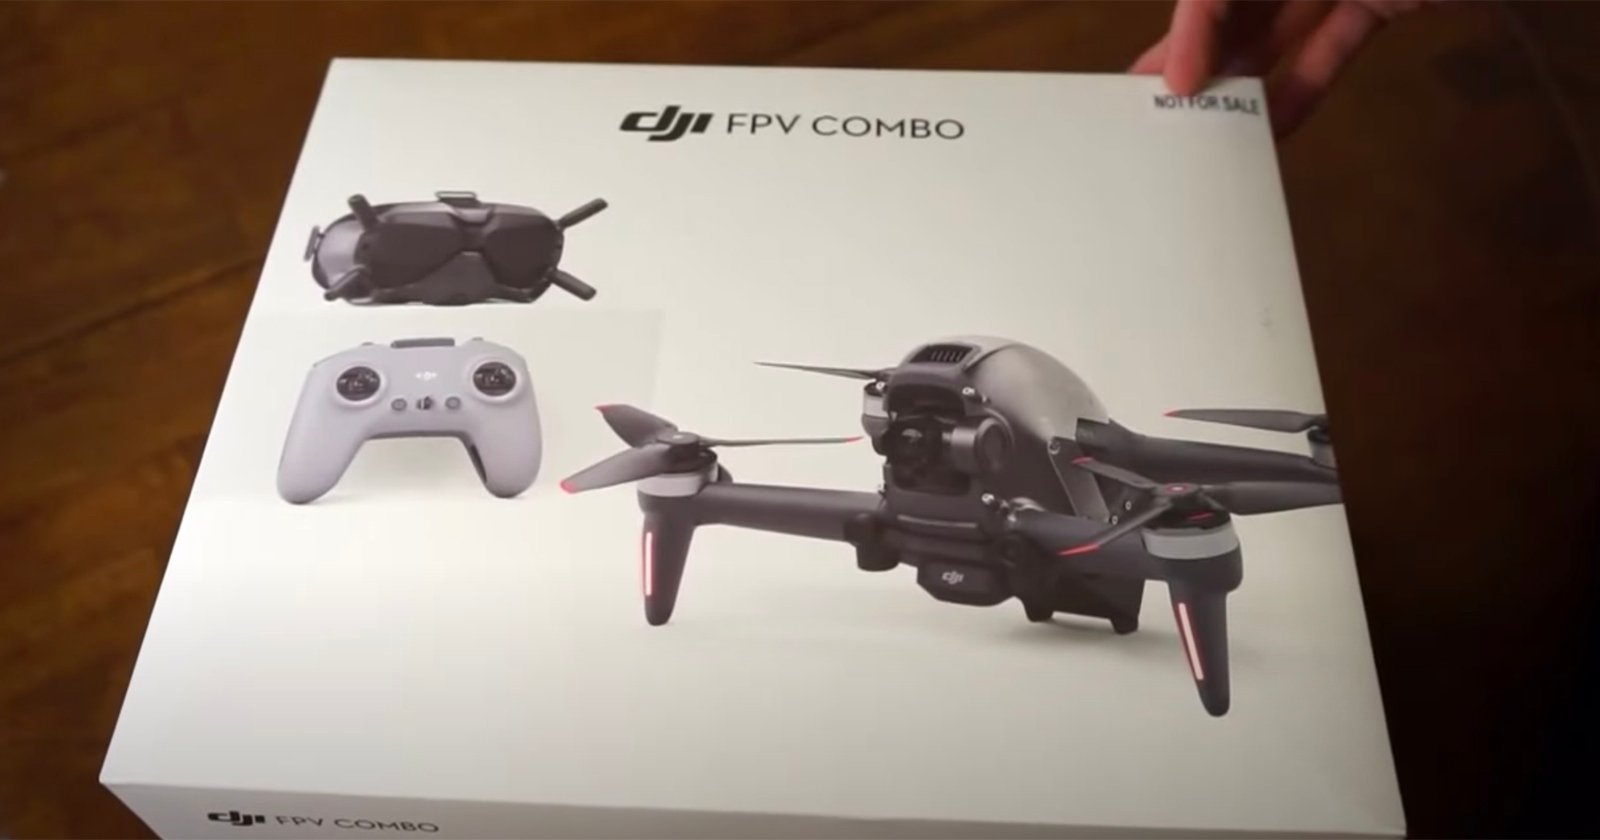 DJI’s next FPV Drone leaked in full unboxing video